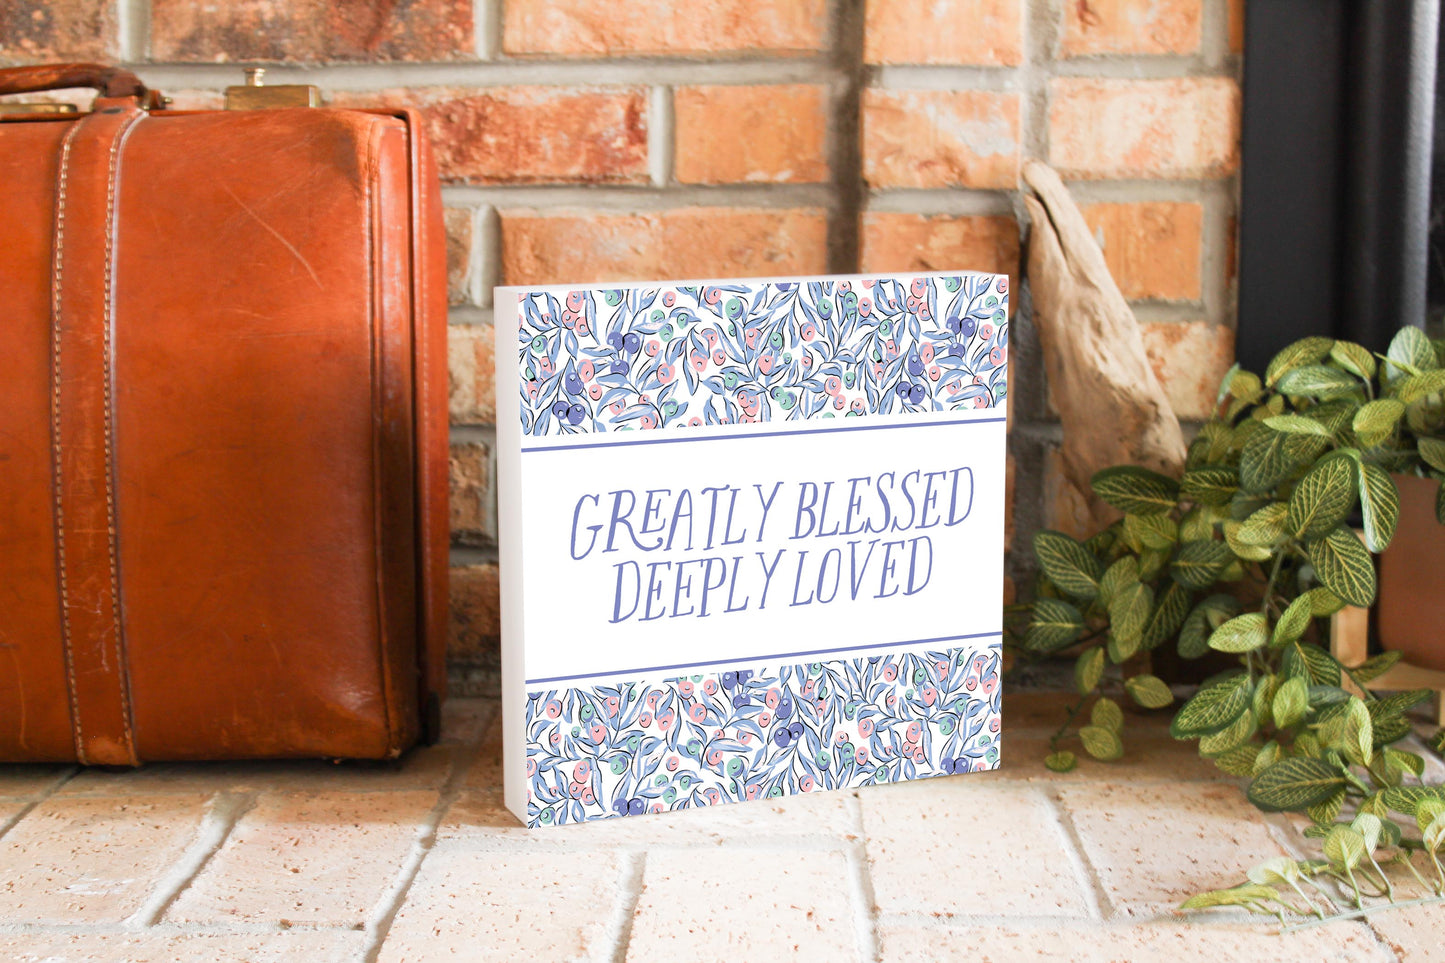 Clairmont & Co Faith Greatly Blessed Deeply Loved | 10x10